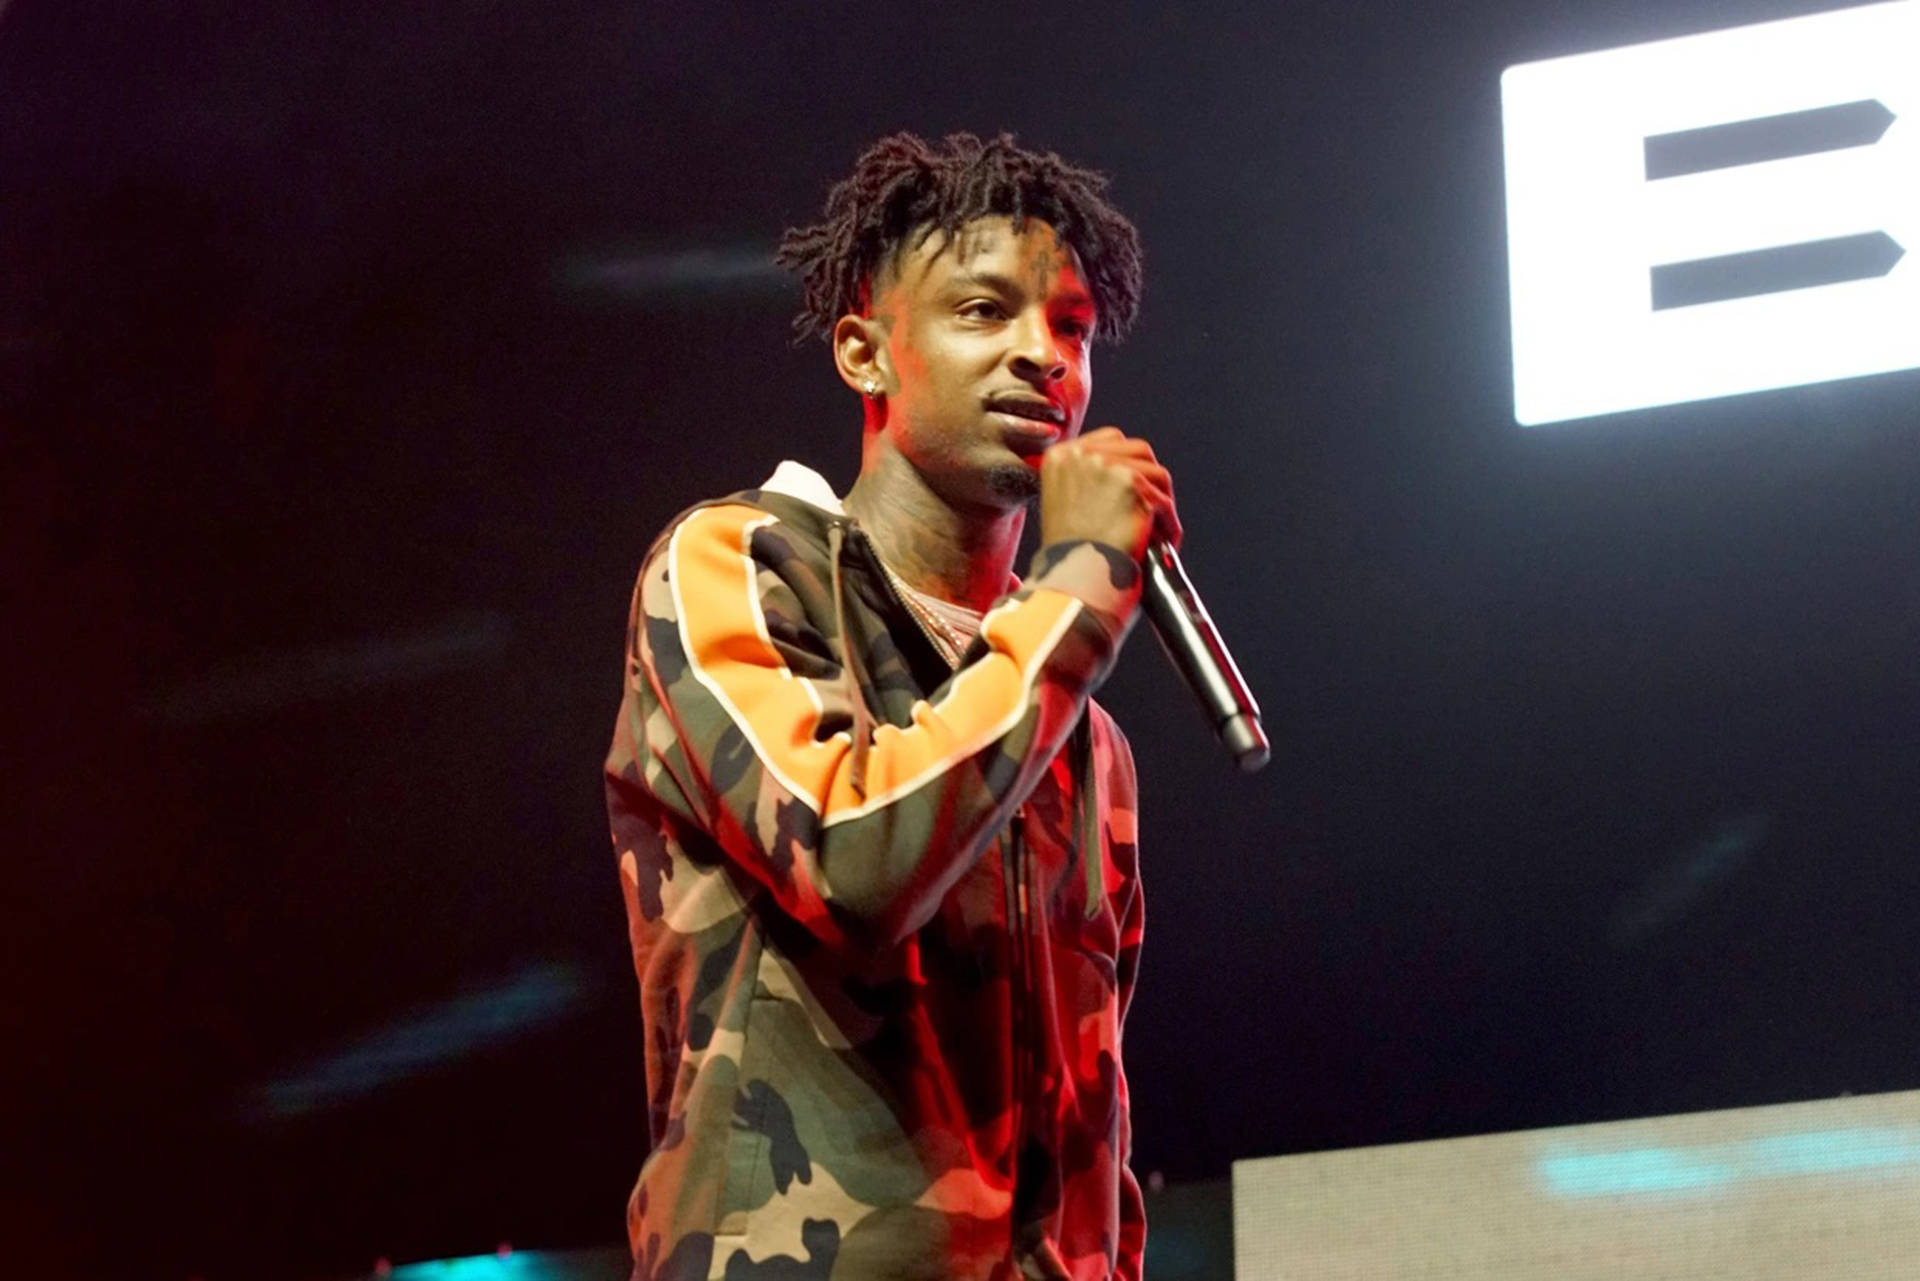 21 Savage 2017 Bet Experience Background